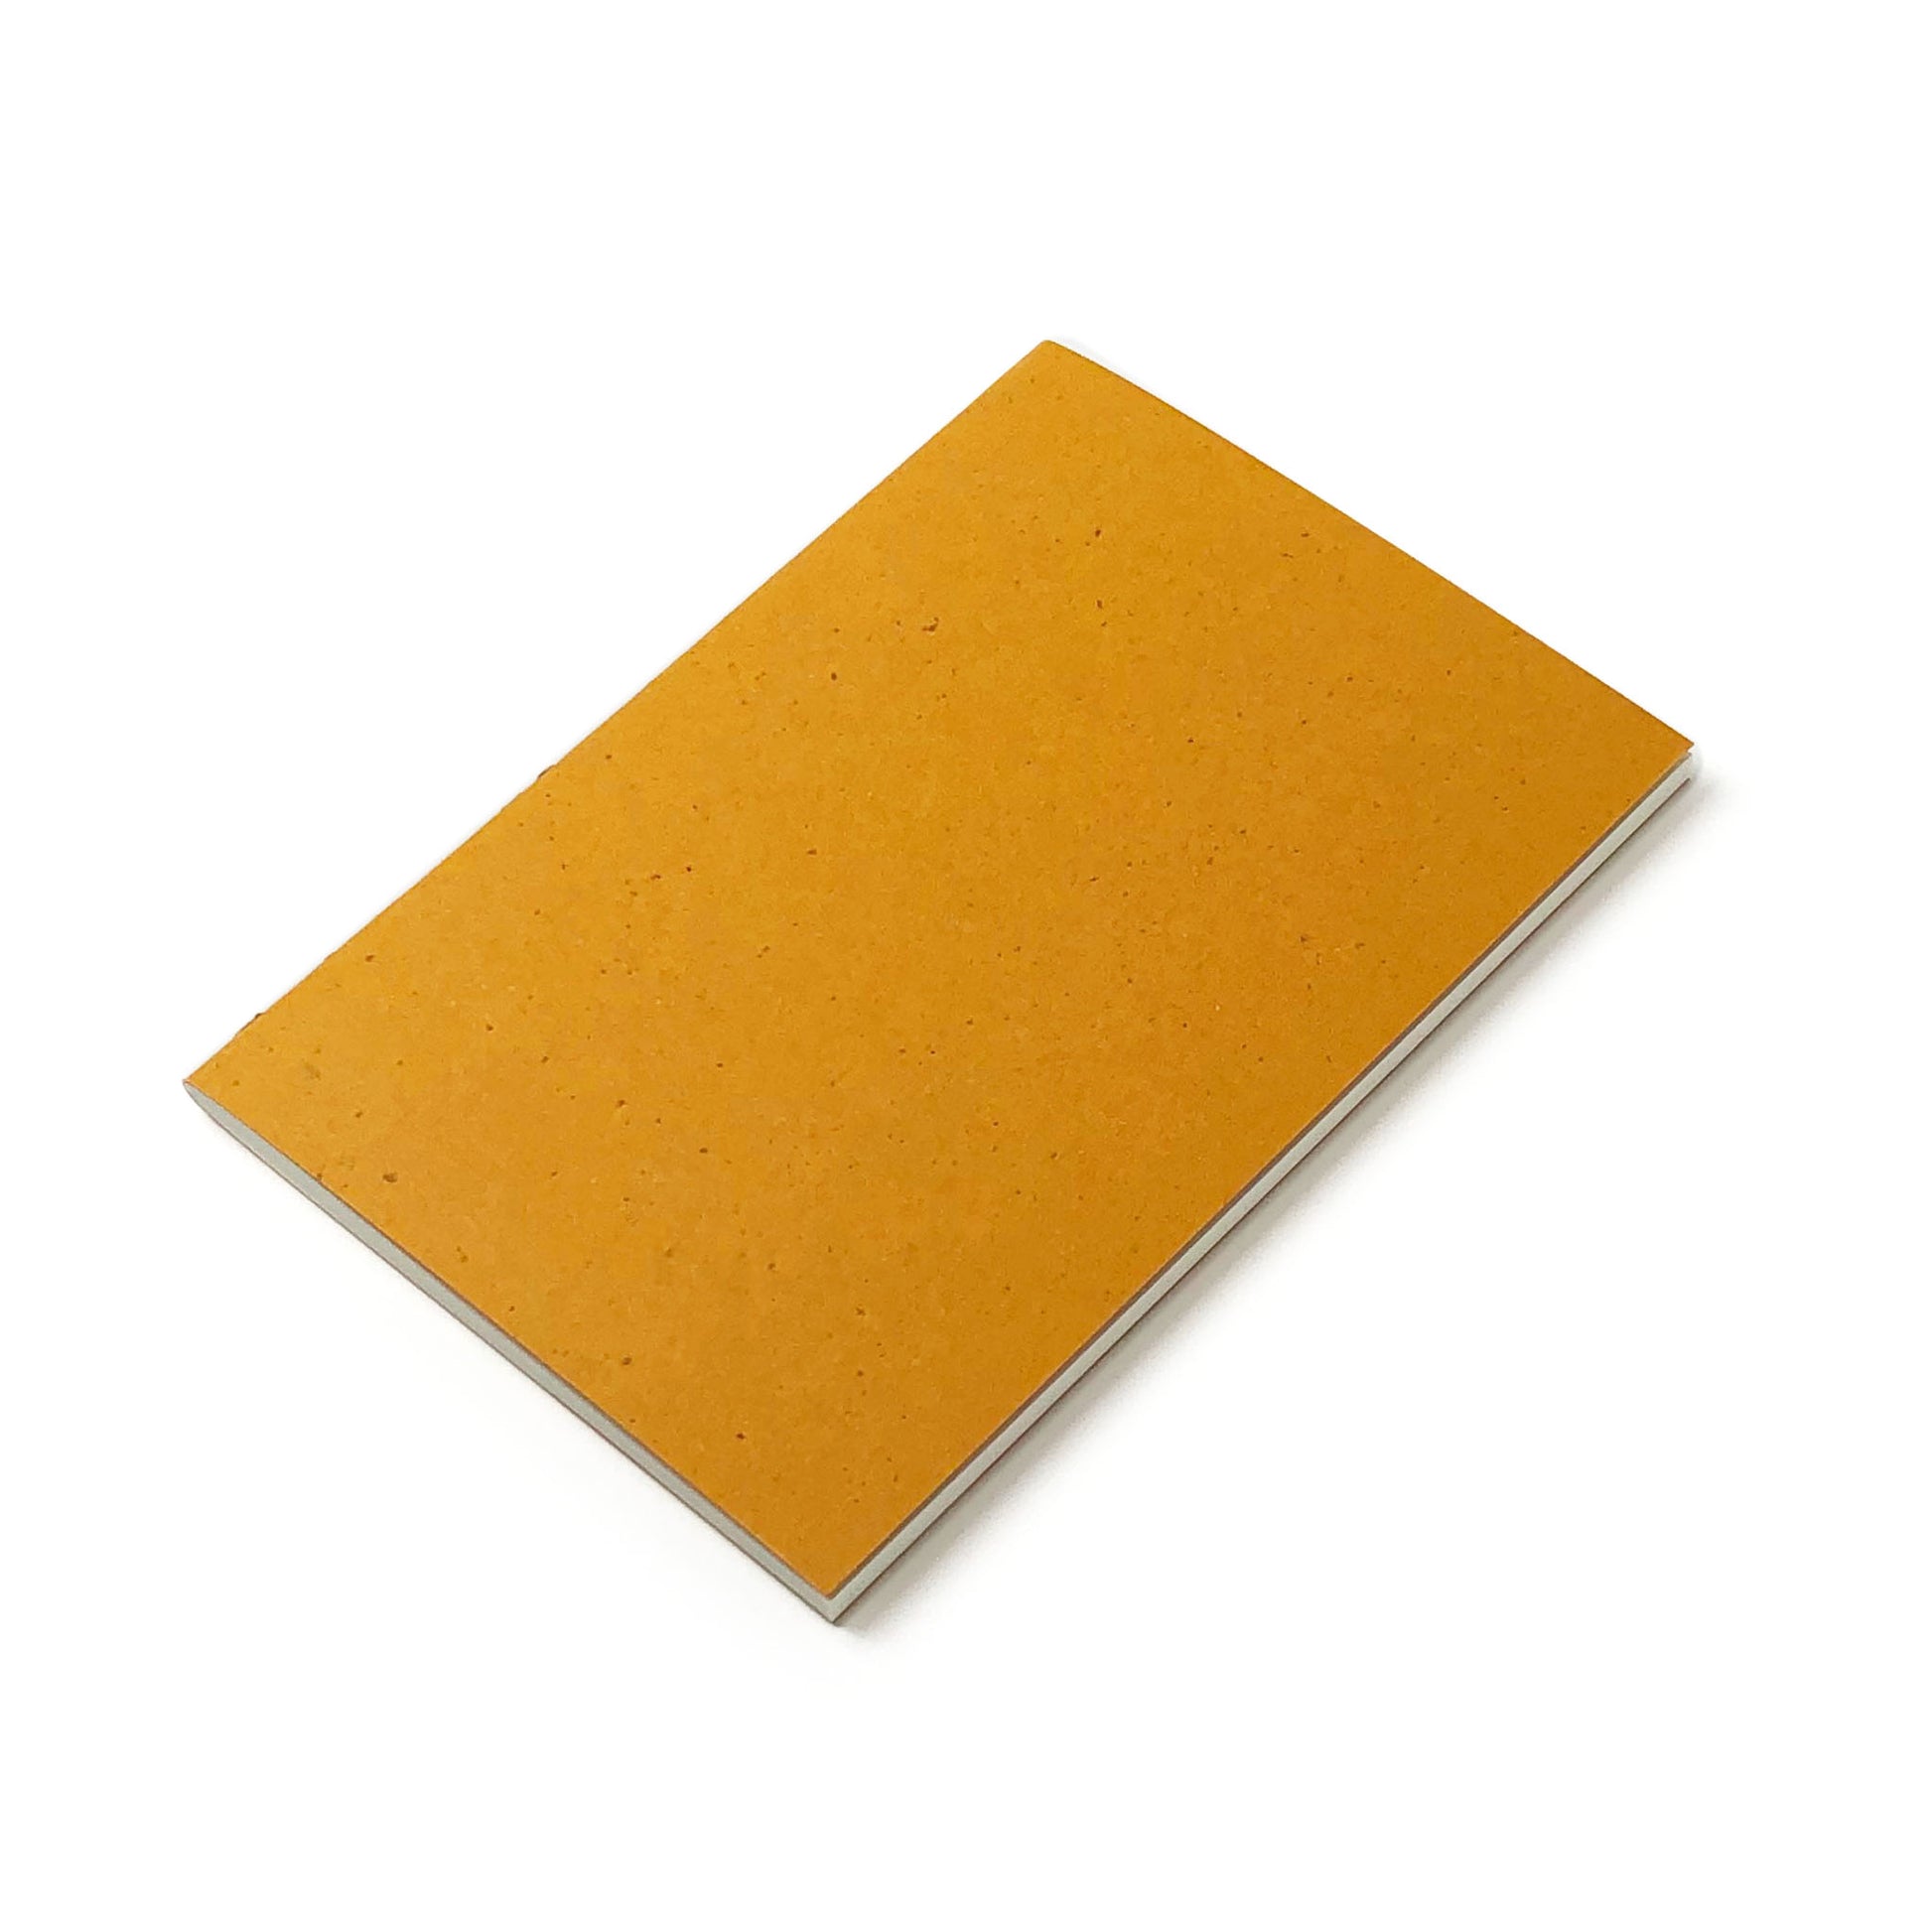 Tilted yellow ochre notebook containing white pages, is positioned on a white background.